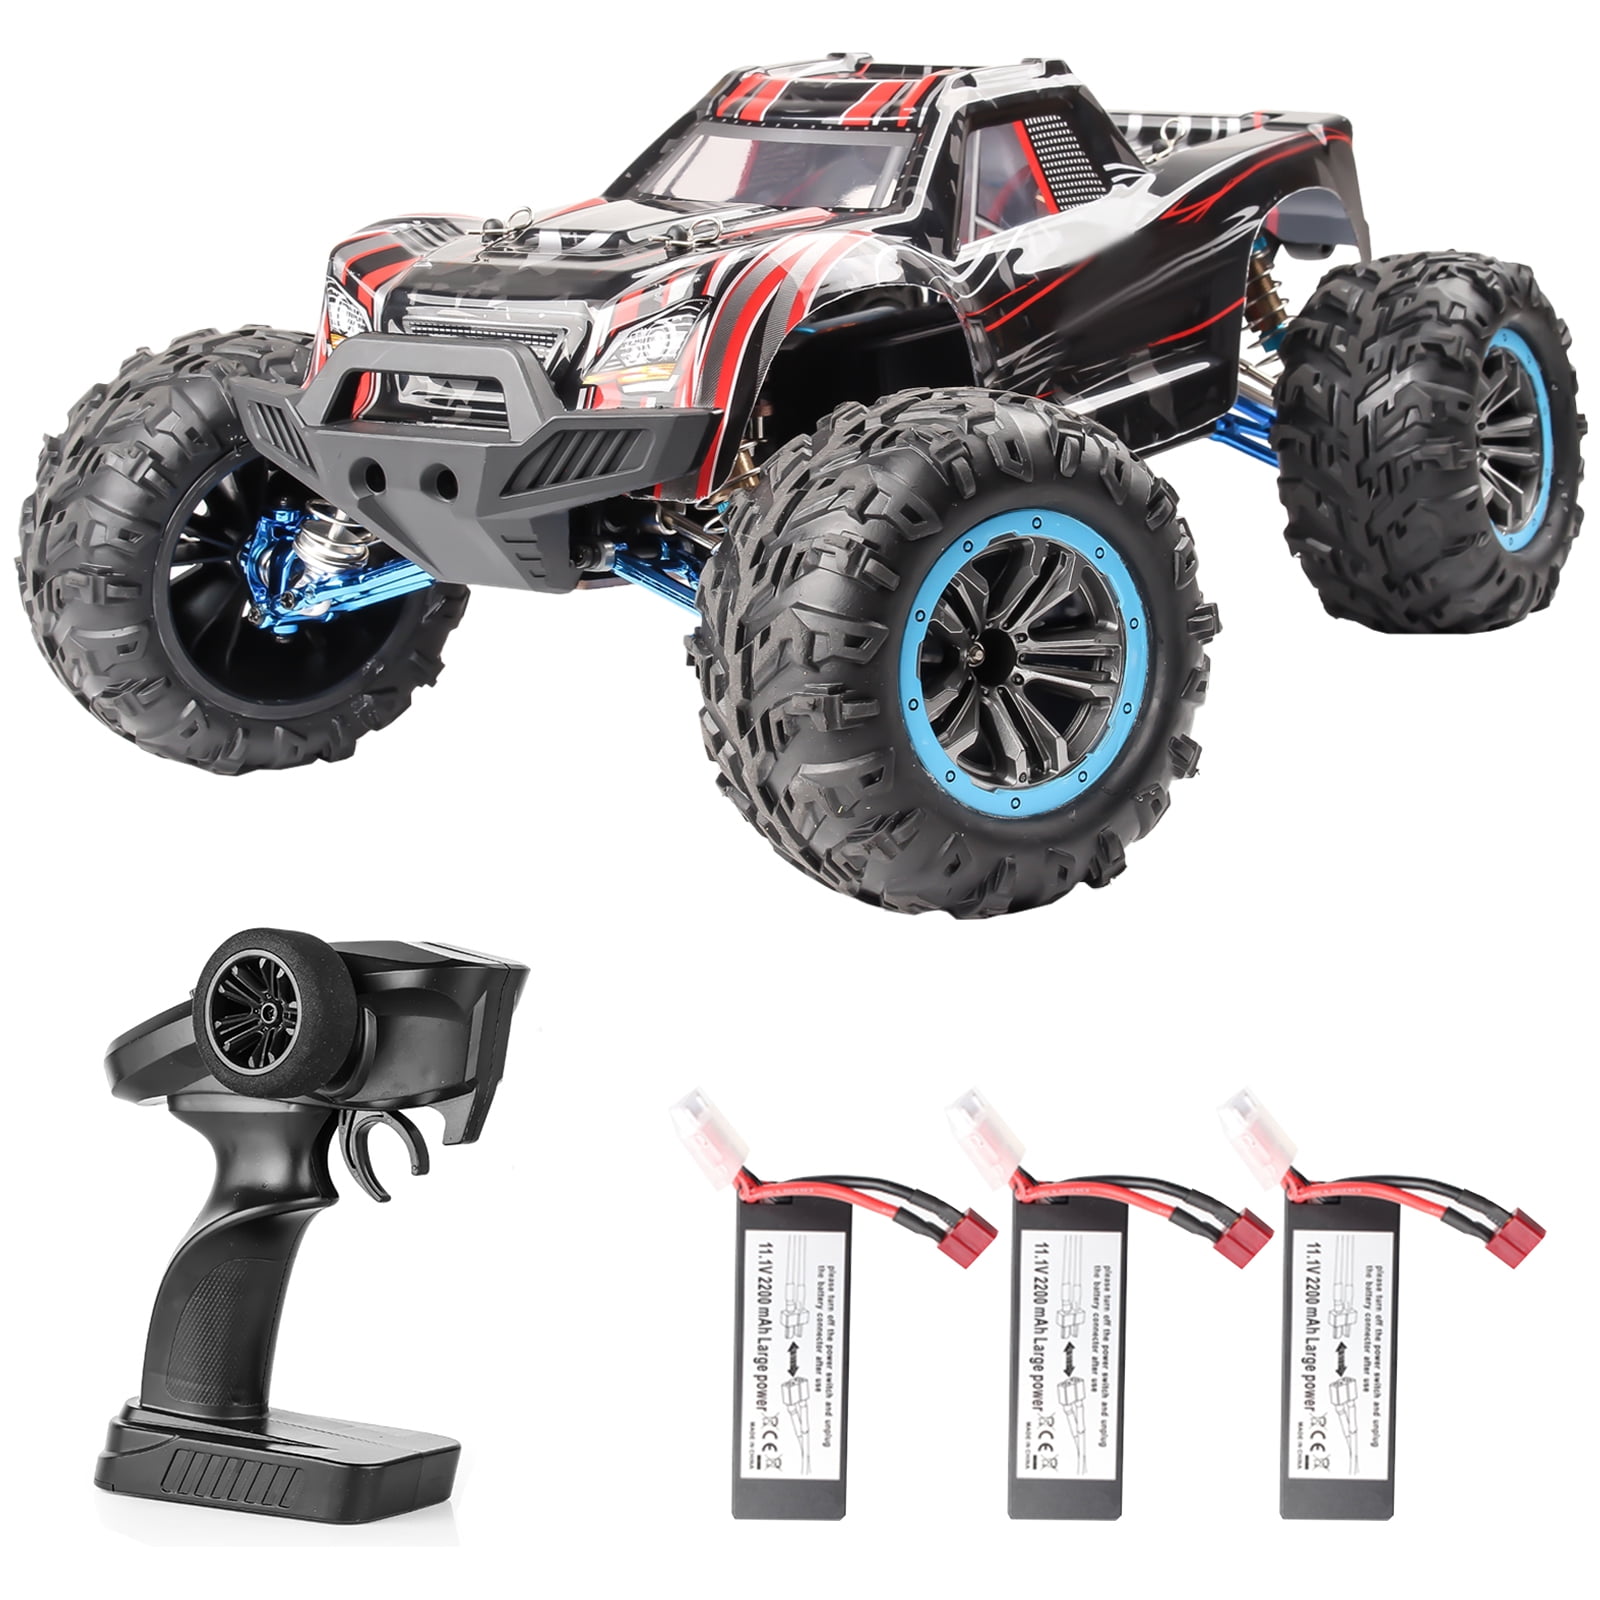 verkoper Modernisering vrijgesteld MABOTO F21A 1/10 Off-road Car RC Racing Climbing Car 4WD RTR 2.4Ghz 80km/h  Brushless Motor Water Drifting Alloy Frame Gifts For 14+Ages w/3 Battery -  Walmart.com